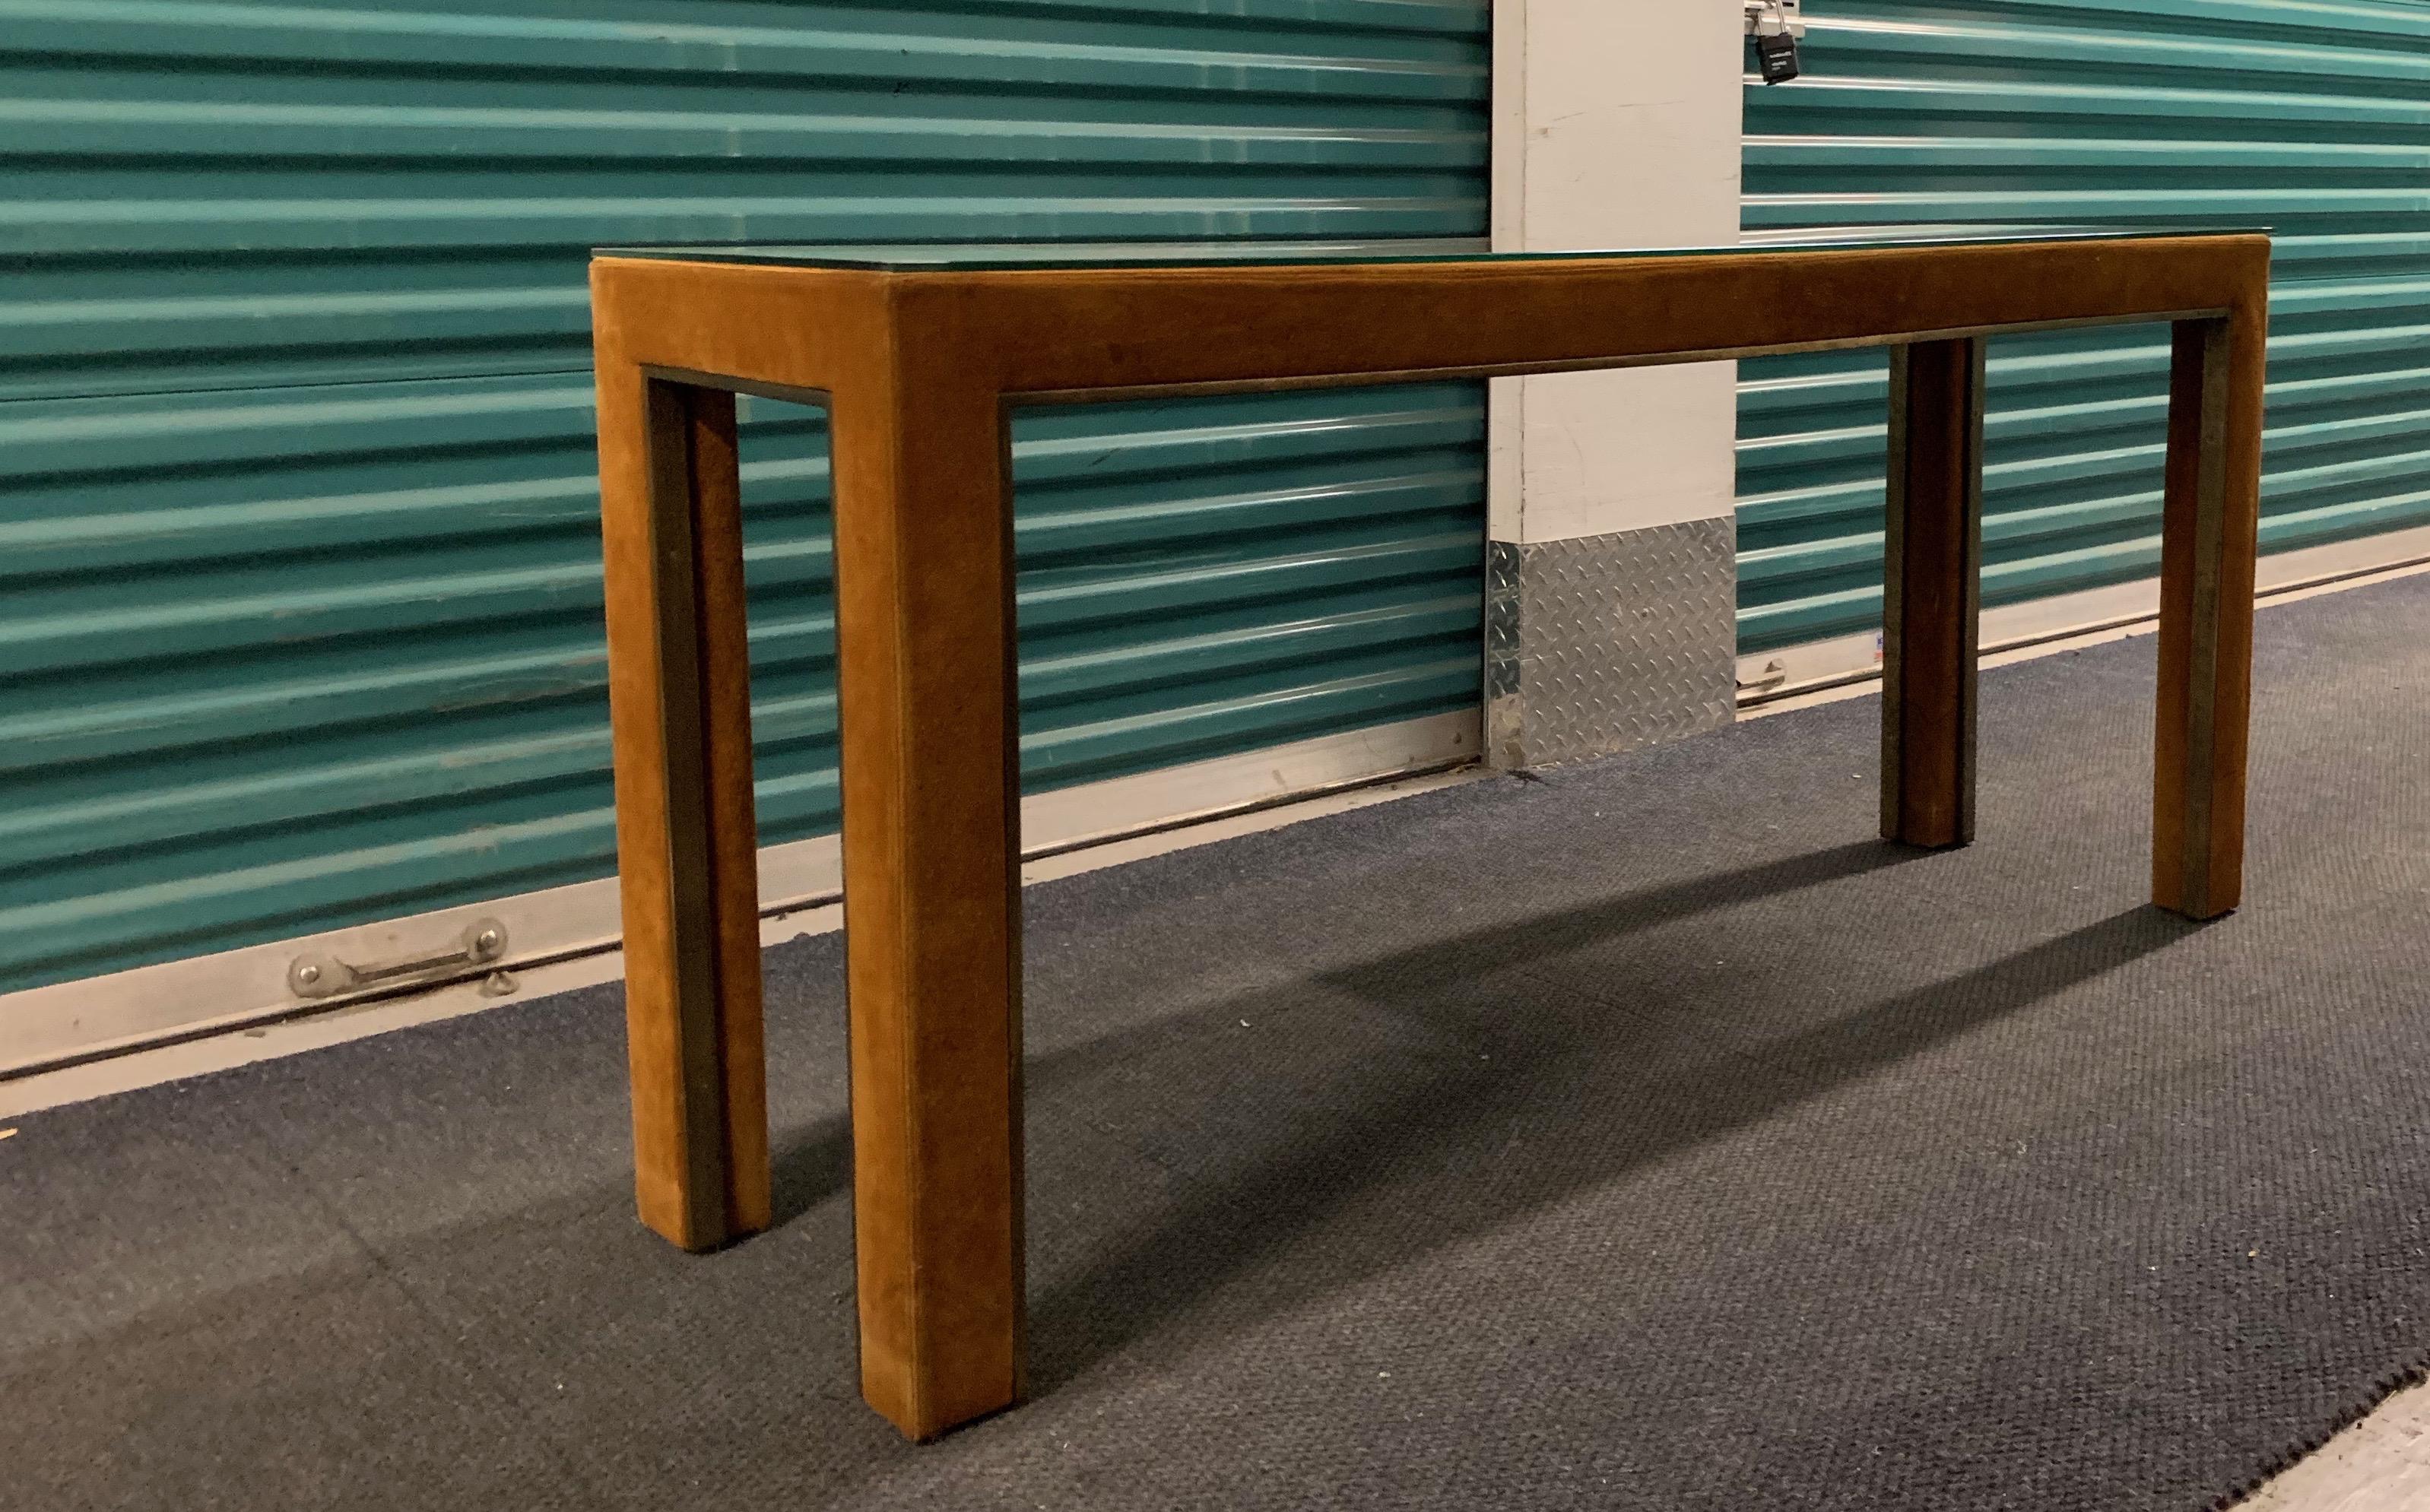 Caramel suede and bronze console table by Guido Faleschini i4 Mariani for Pace. Retailed by Hermès at select locations, 1970s. Table completely covered in suede with thin bronze metal trim. Custom glass top. Measures: H 27.75 inches, W 60 inches, D